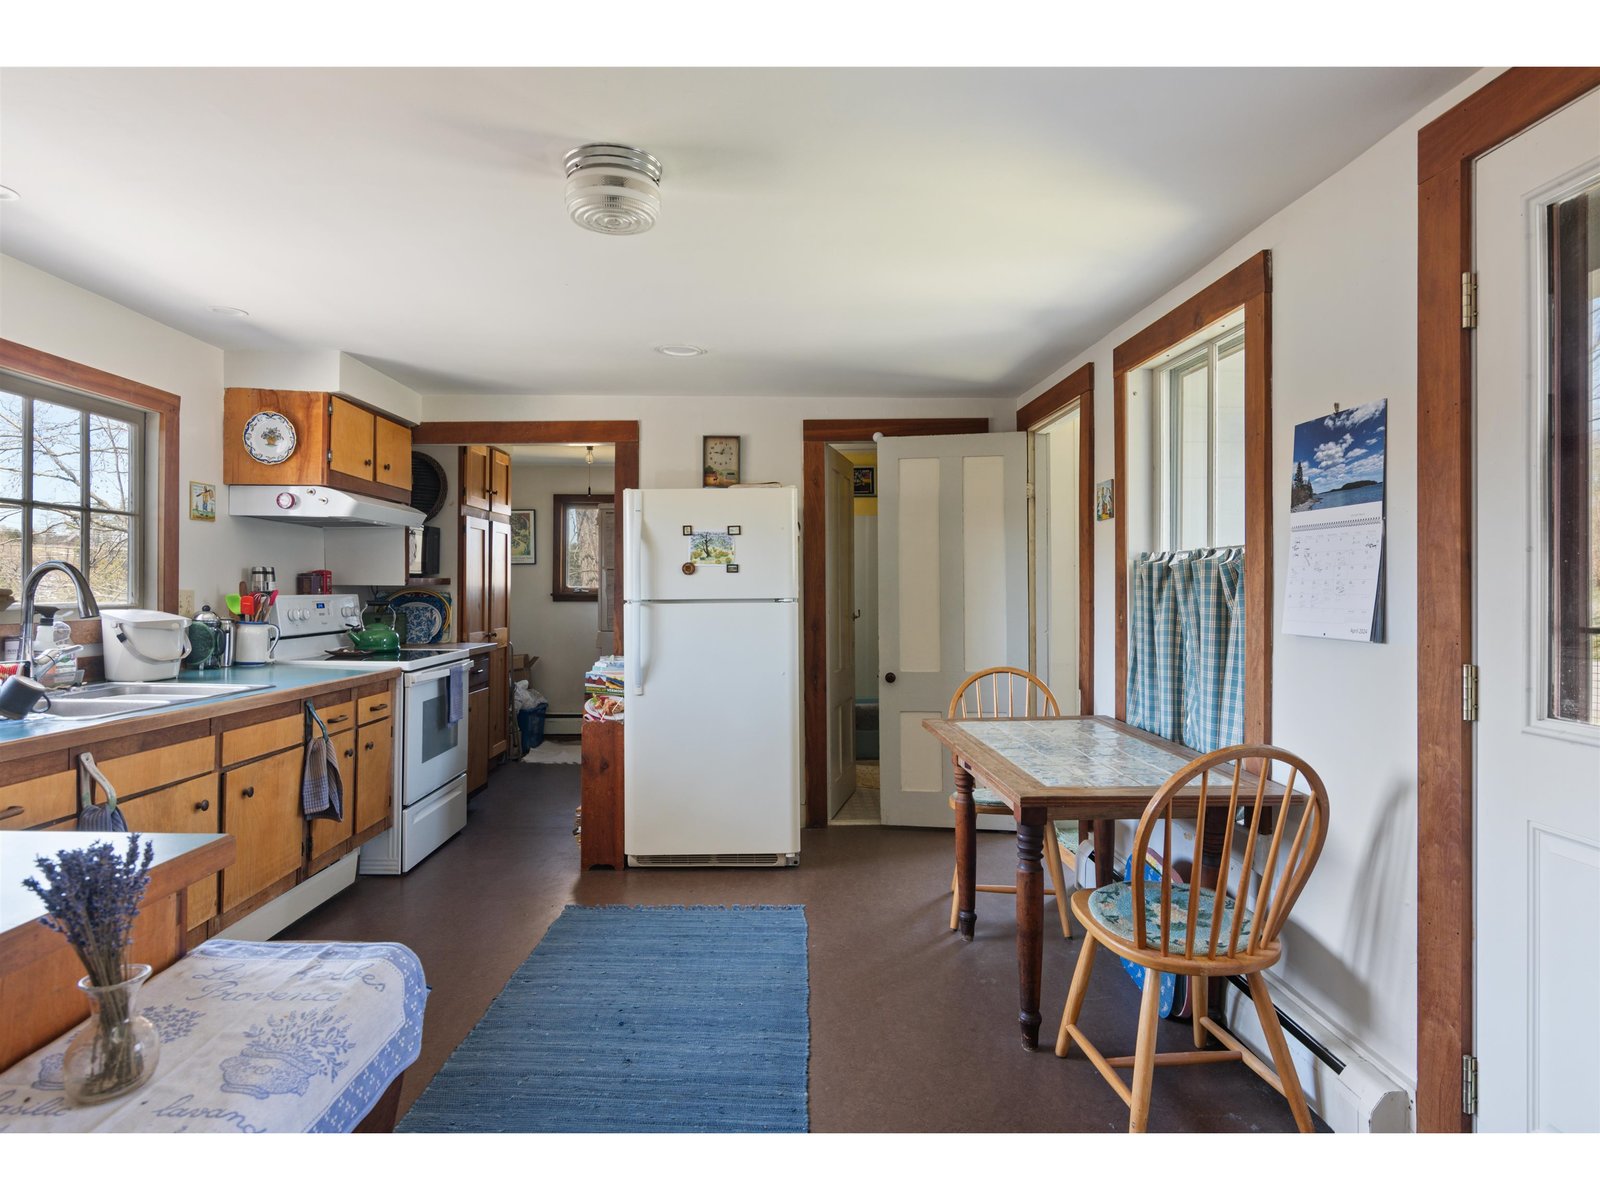 Large kitchen sensibly laid out with the laundry room at the north end